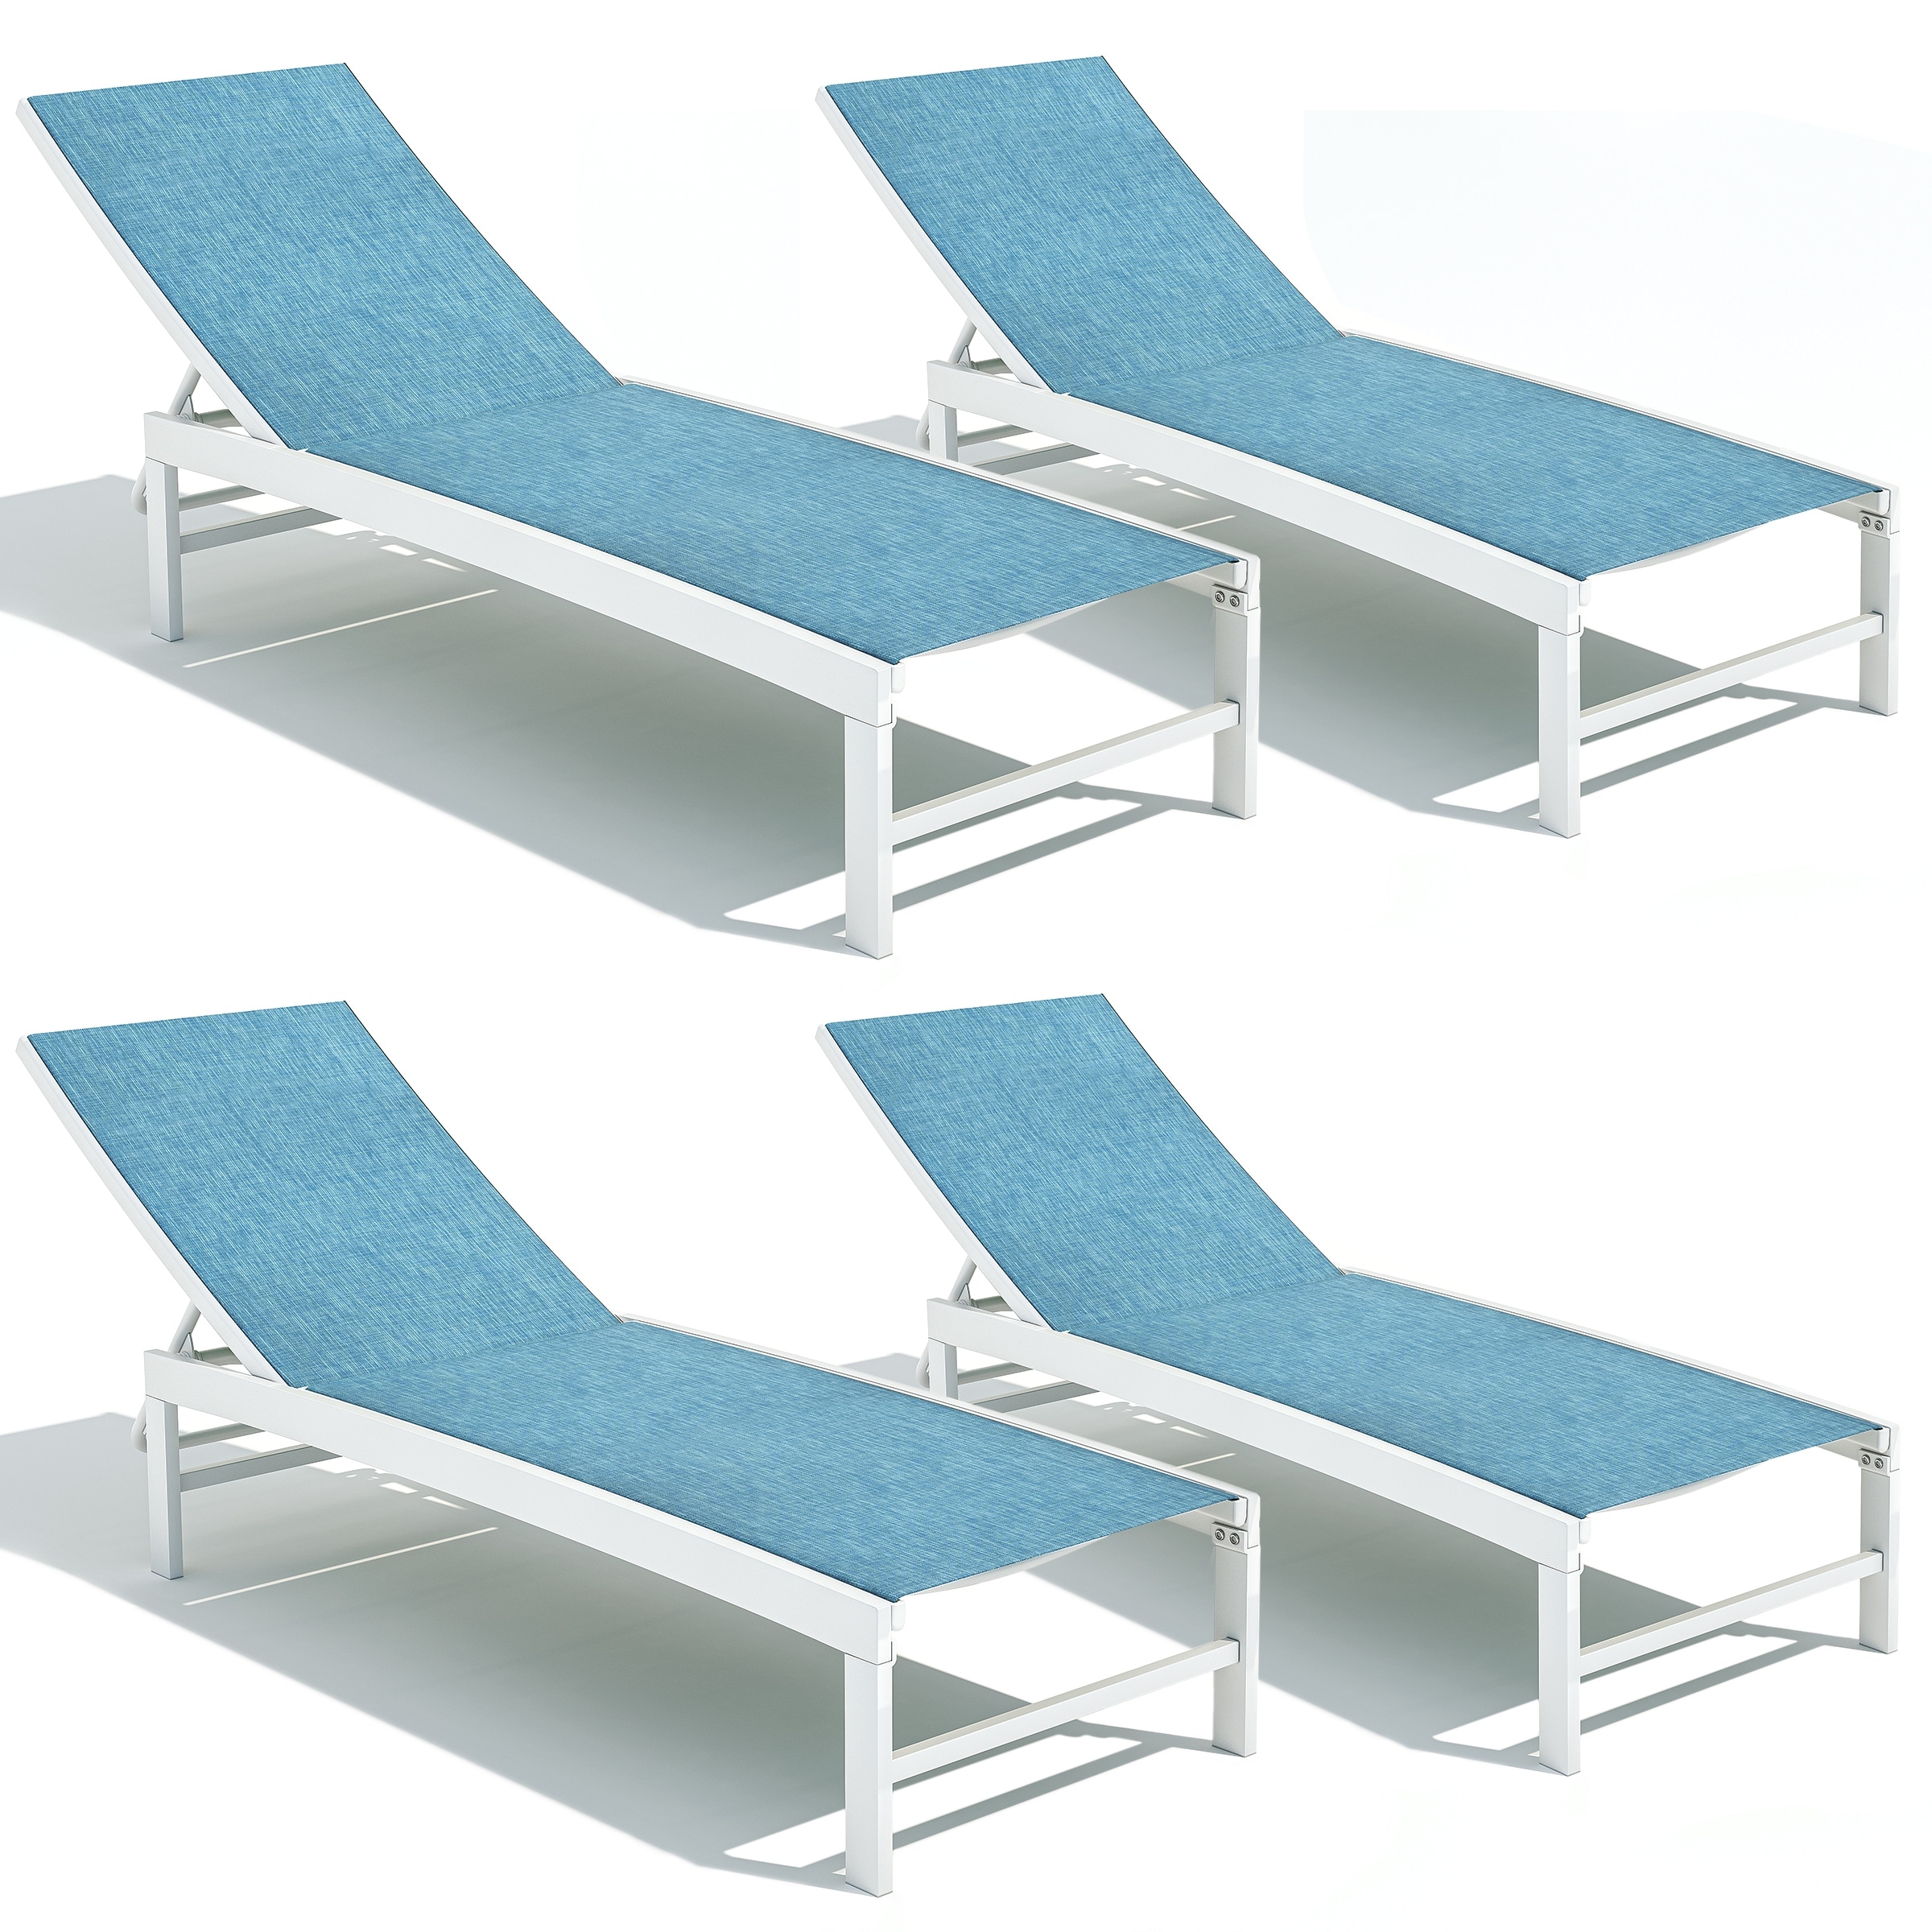 Crestlive Products Adjustable Aluminum Chaise Lounges Set Of 4 - See Picture